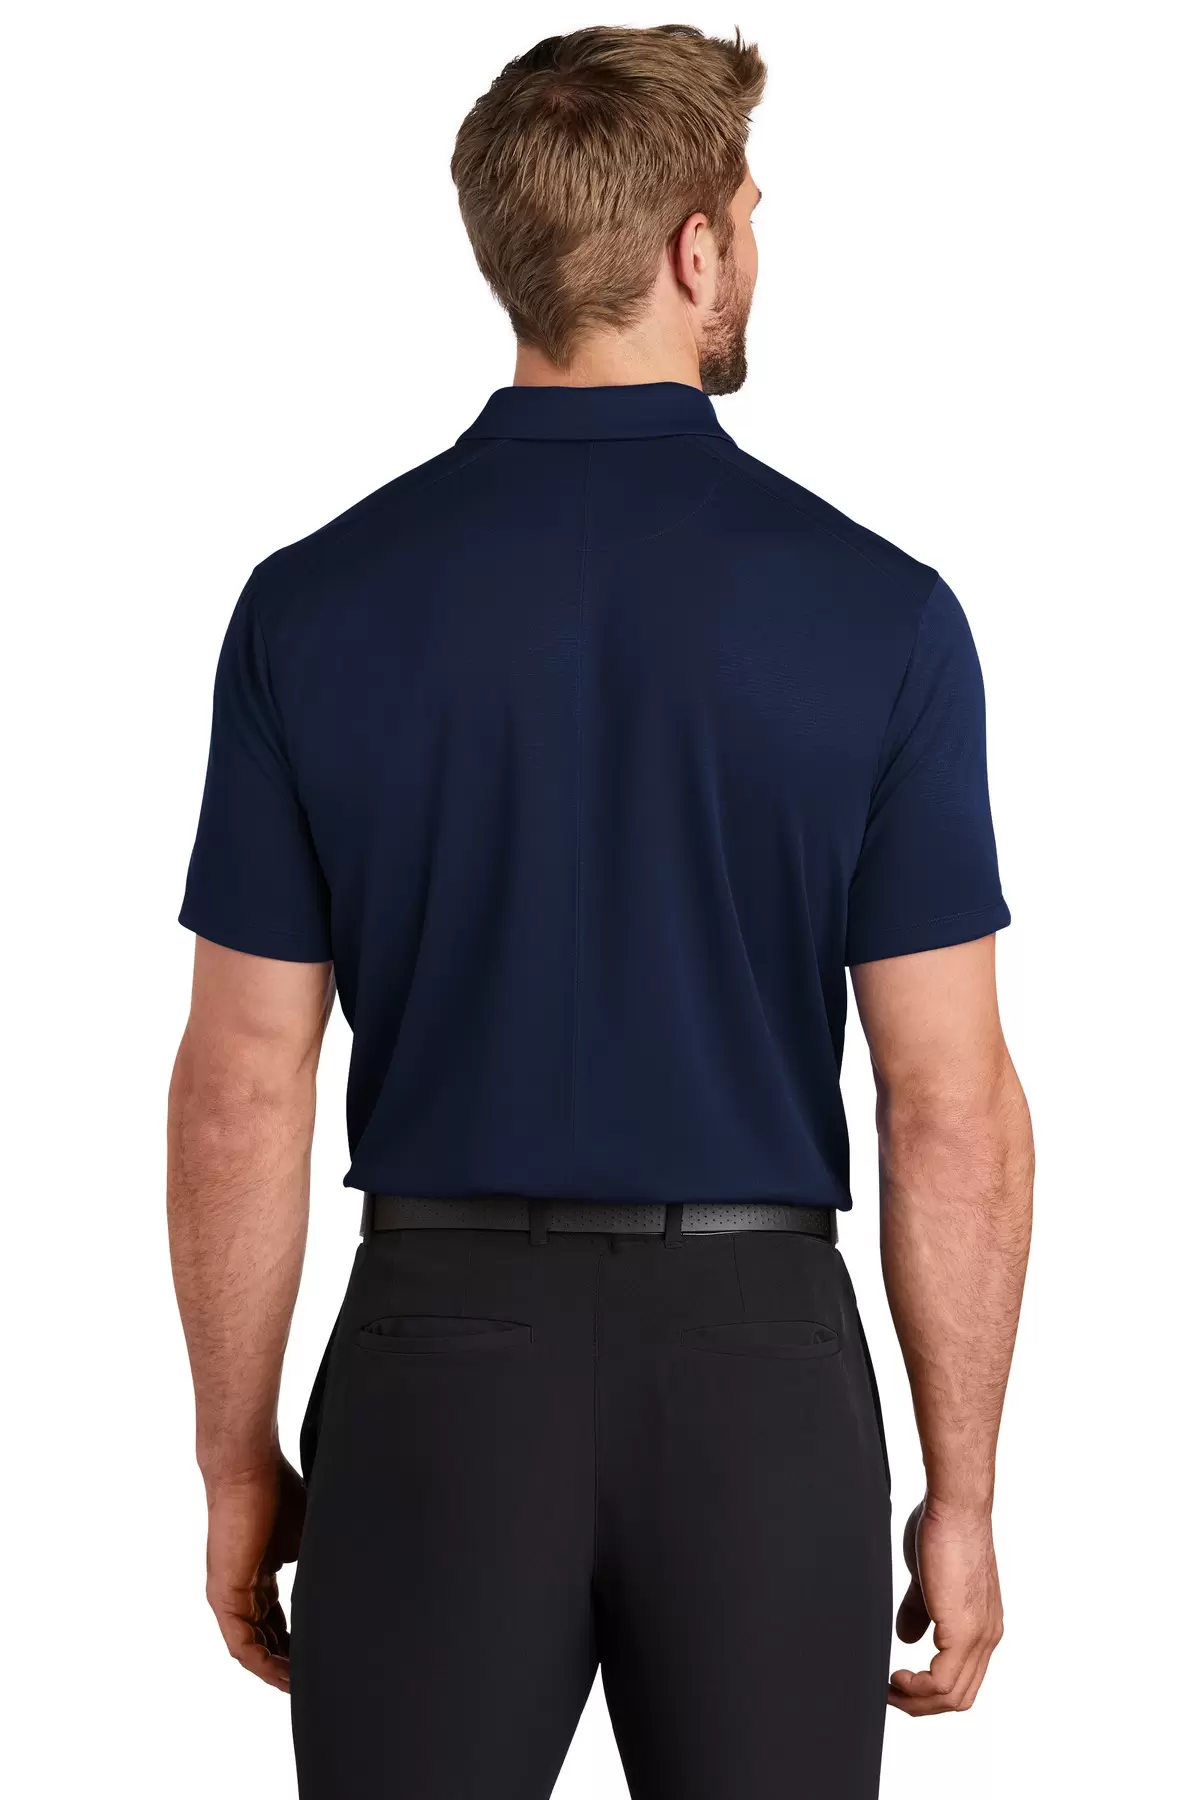 Nike NKBV6042 Dry Essential Solid Polo - Midnight Navy